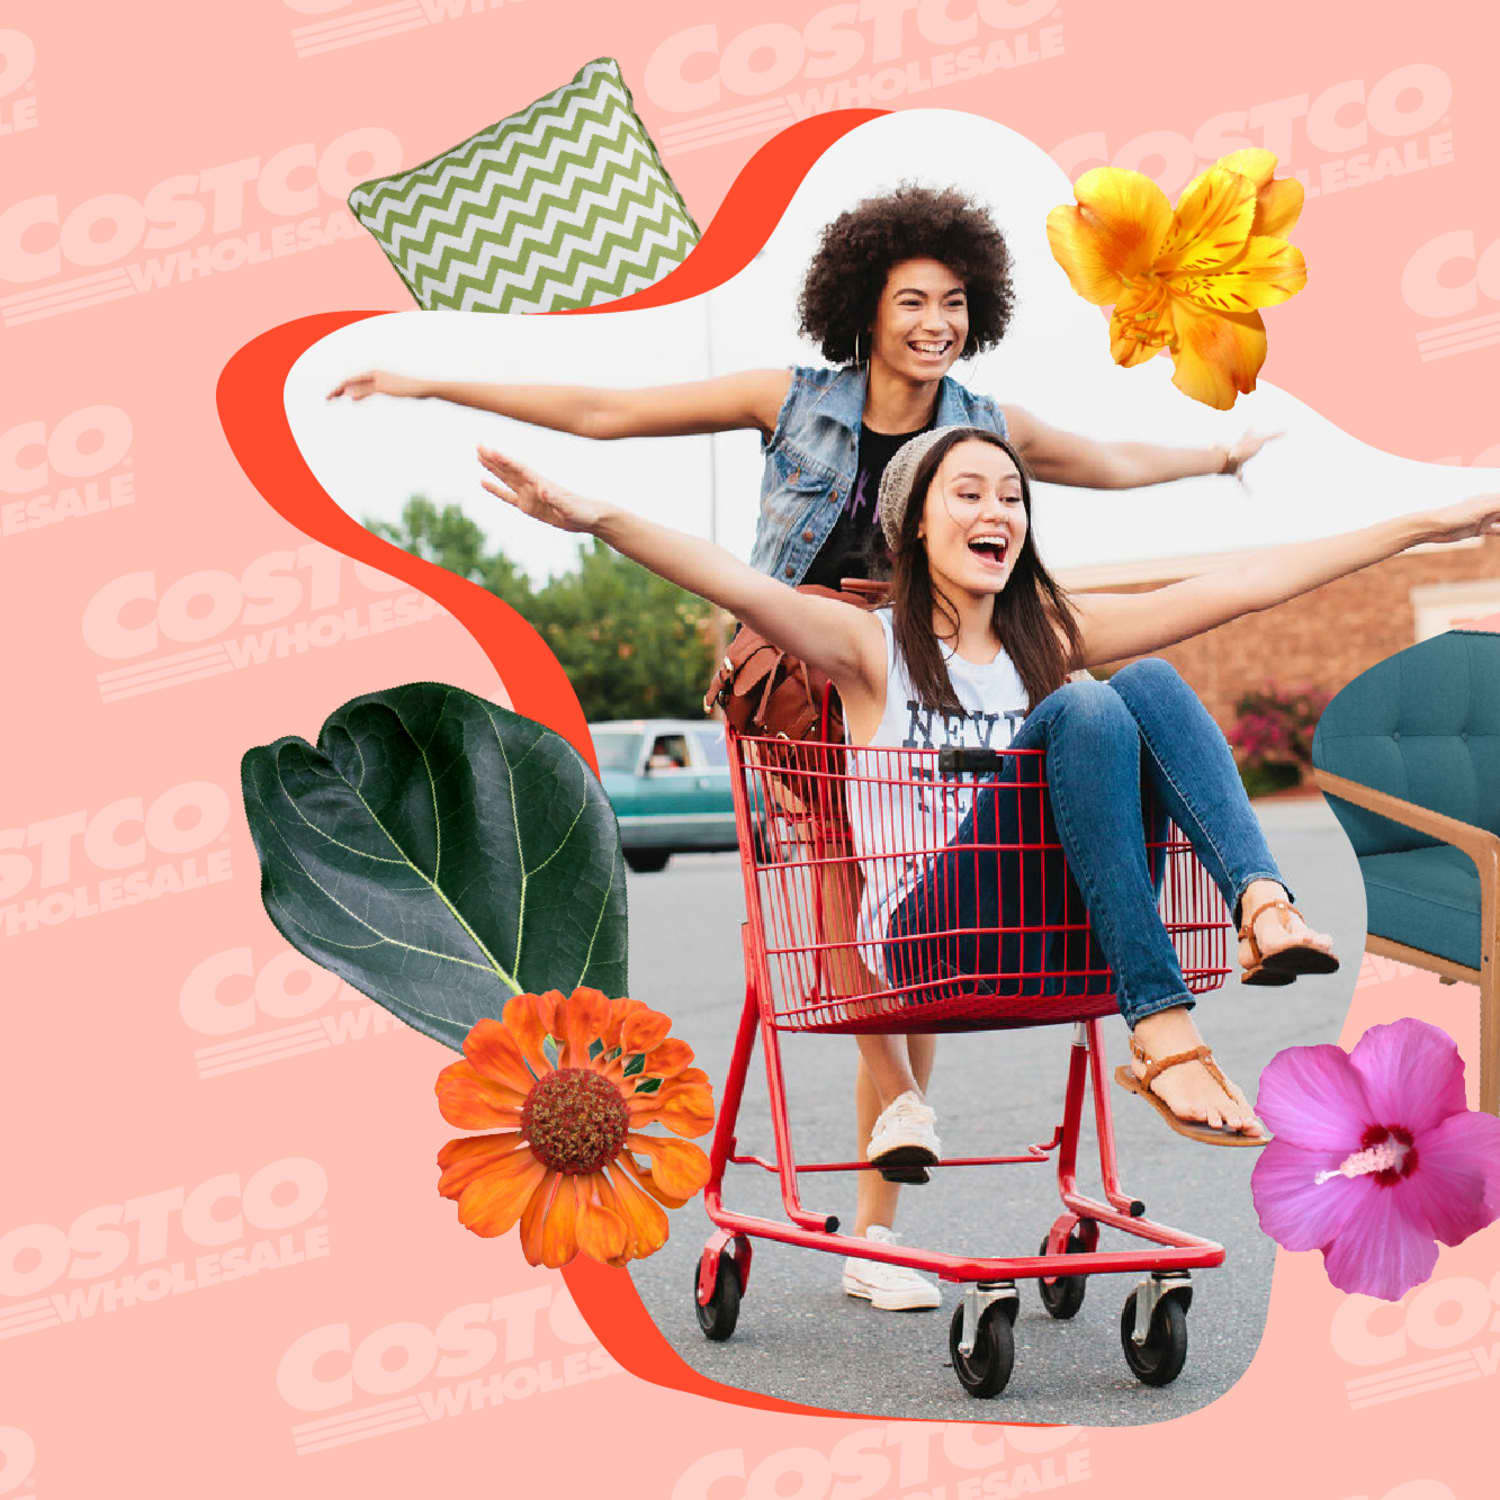 12 Best Gifts for Costco Fans - Parade